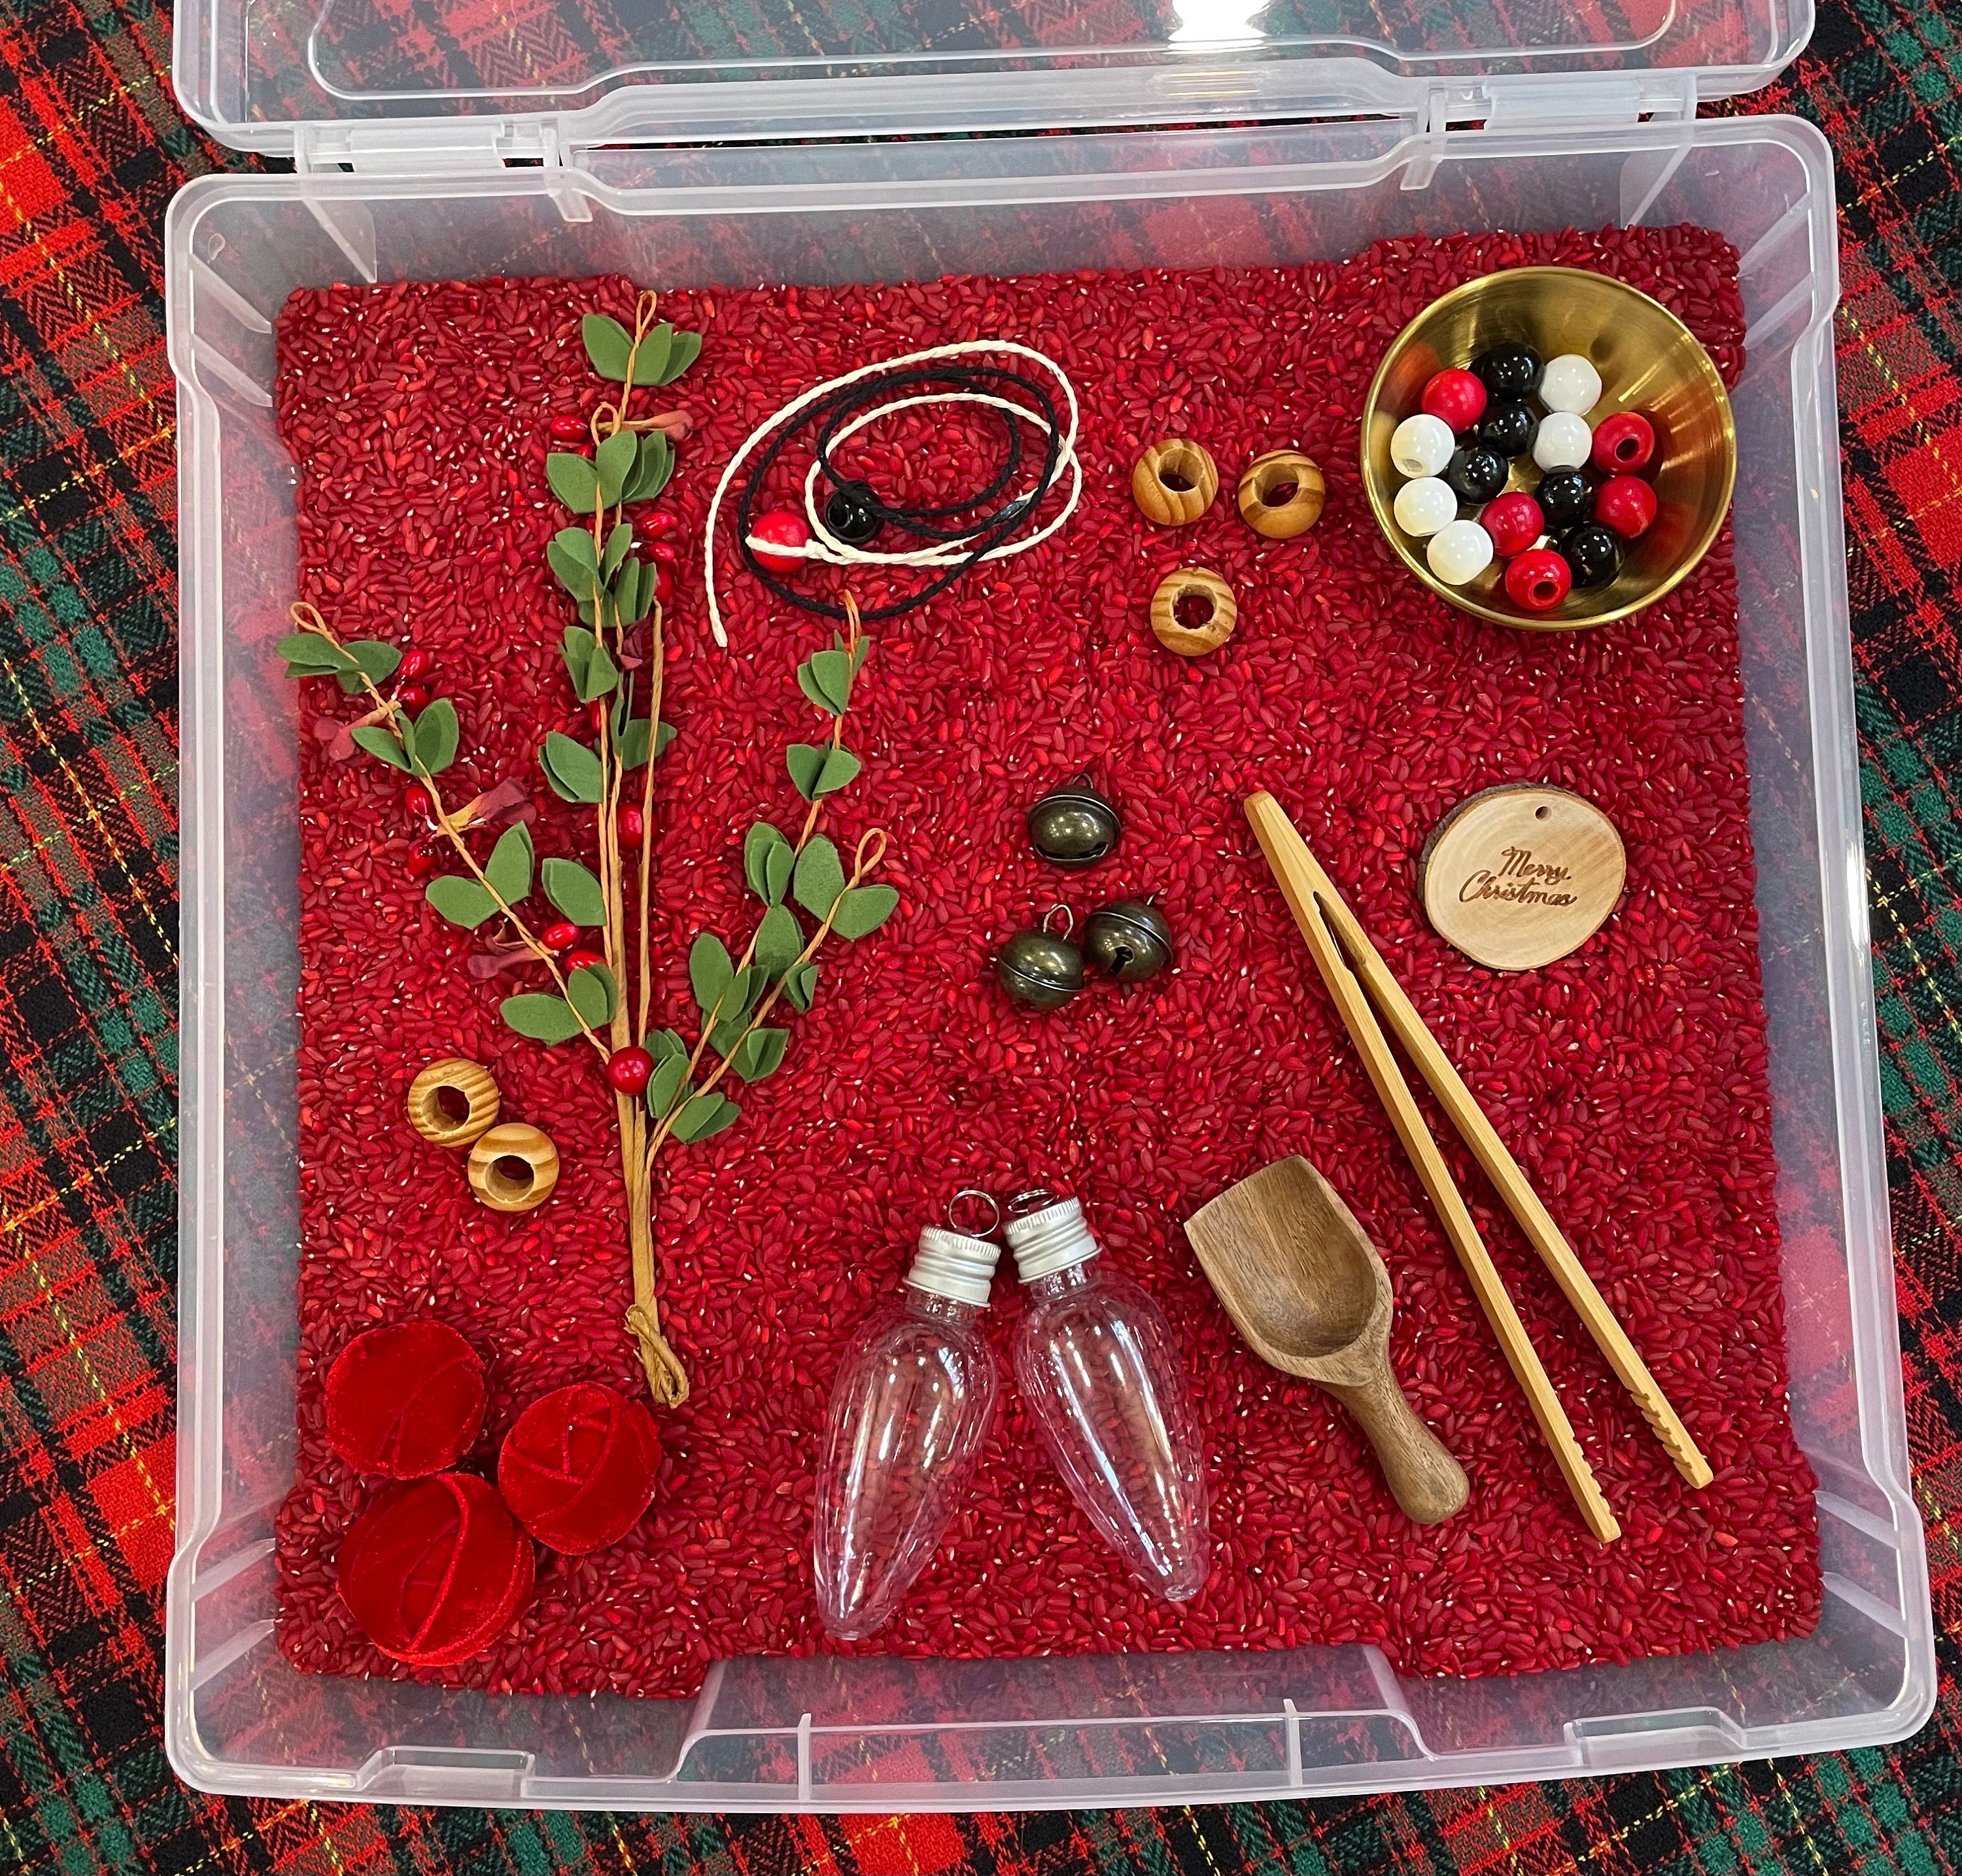 Winter Sensory Bin with Word Recognition - mama♥miss